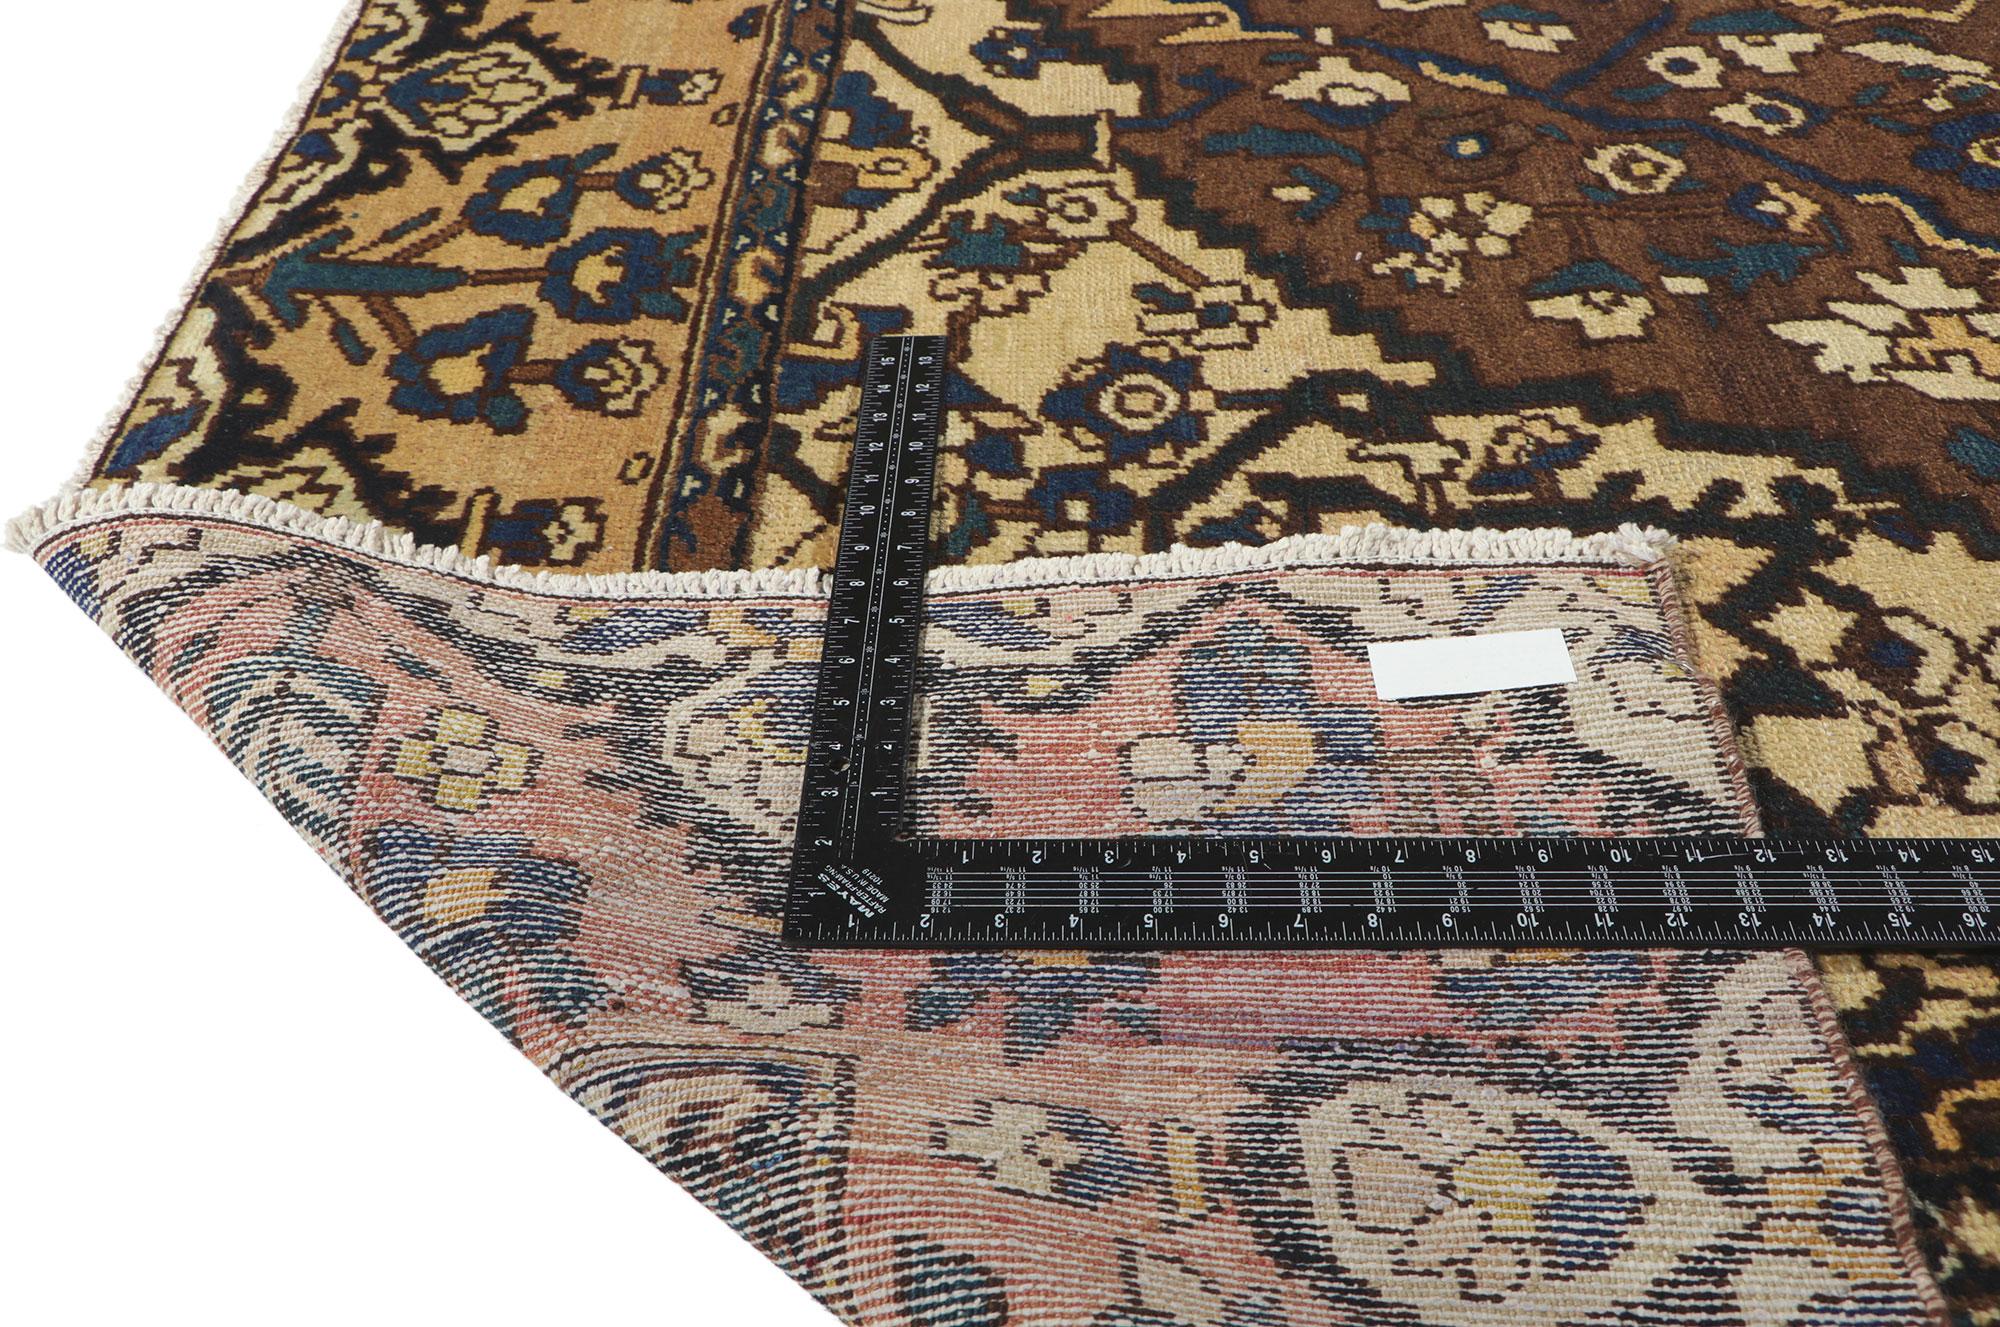 Antique Persian Bakhtiari Rug, Dark and Moody Meets Masculine Sophistication In Good Condition For Sale In Dallas, TX